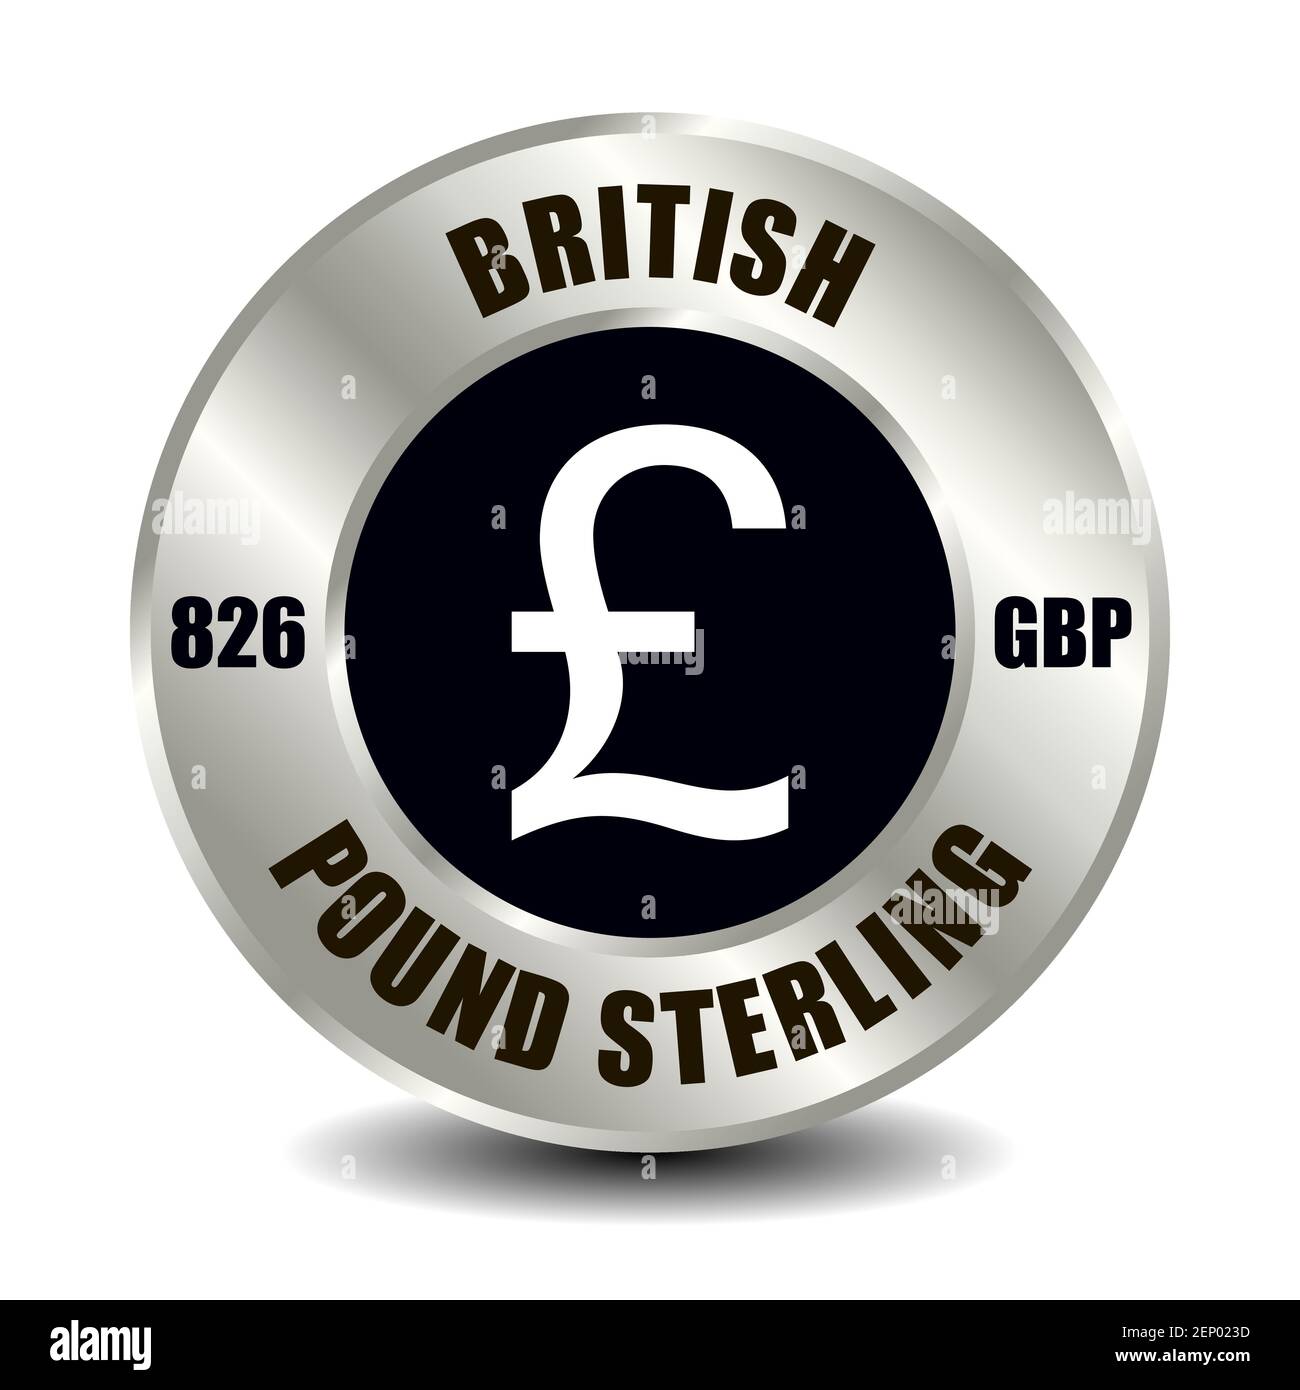 Great Britain, United Kingdom money icon isolated on round silver coin. Vector sign of currency symbol with international ISO code and abbreviation Stock Vector